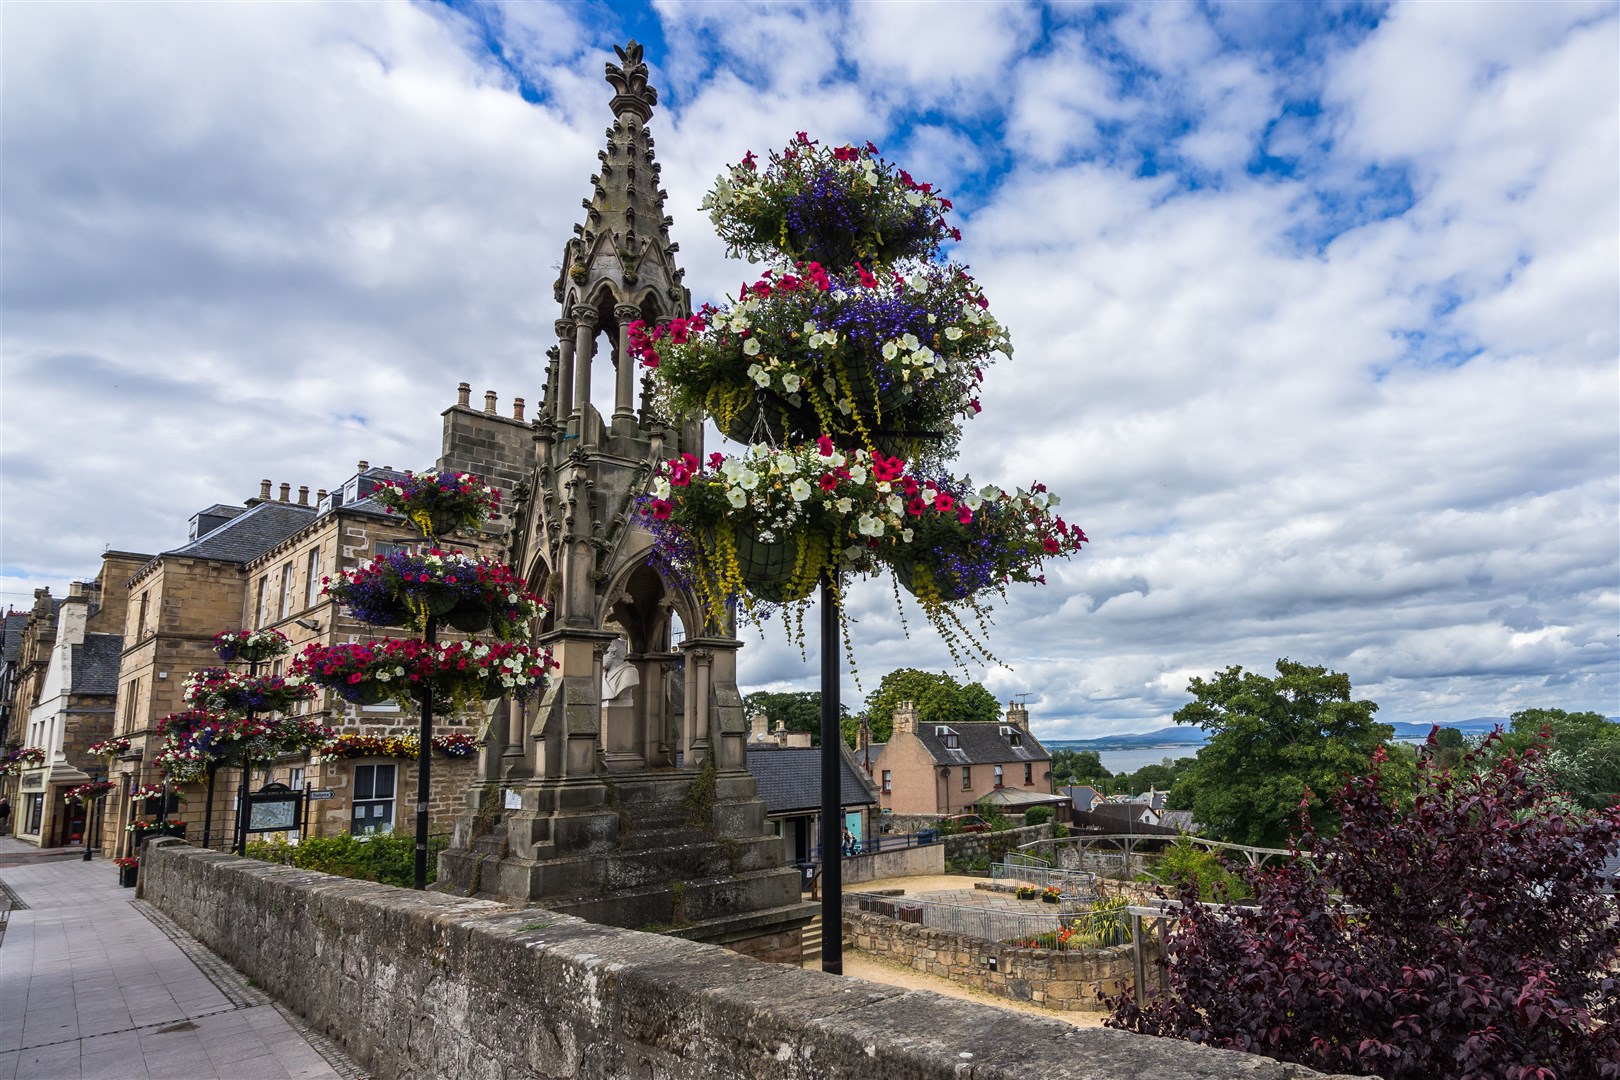 Flowers decoration in the small town of Tain, Scotland, Britain